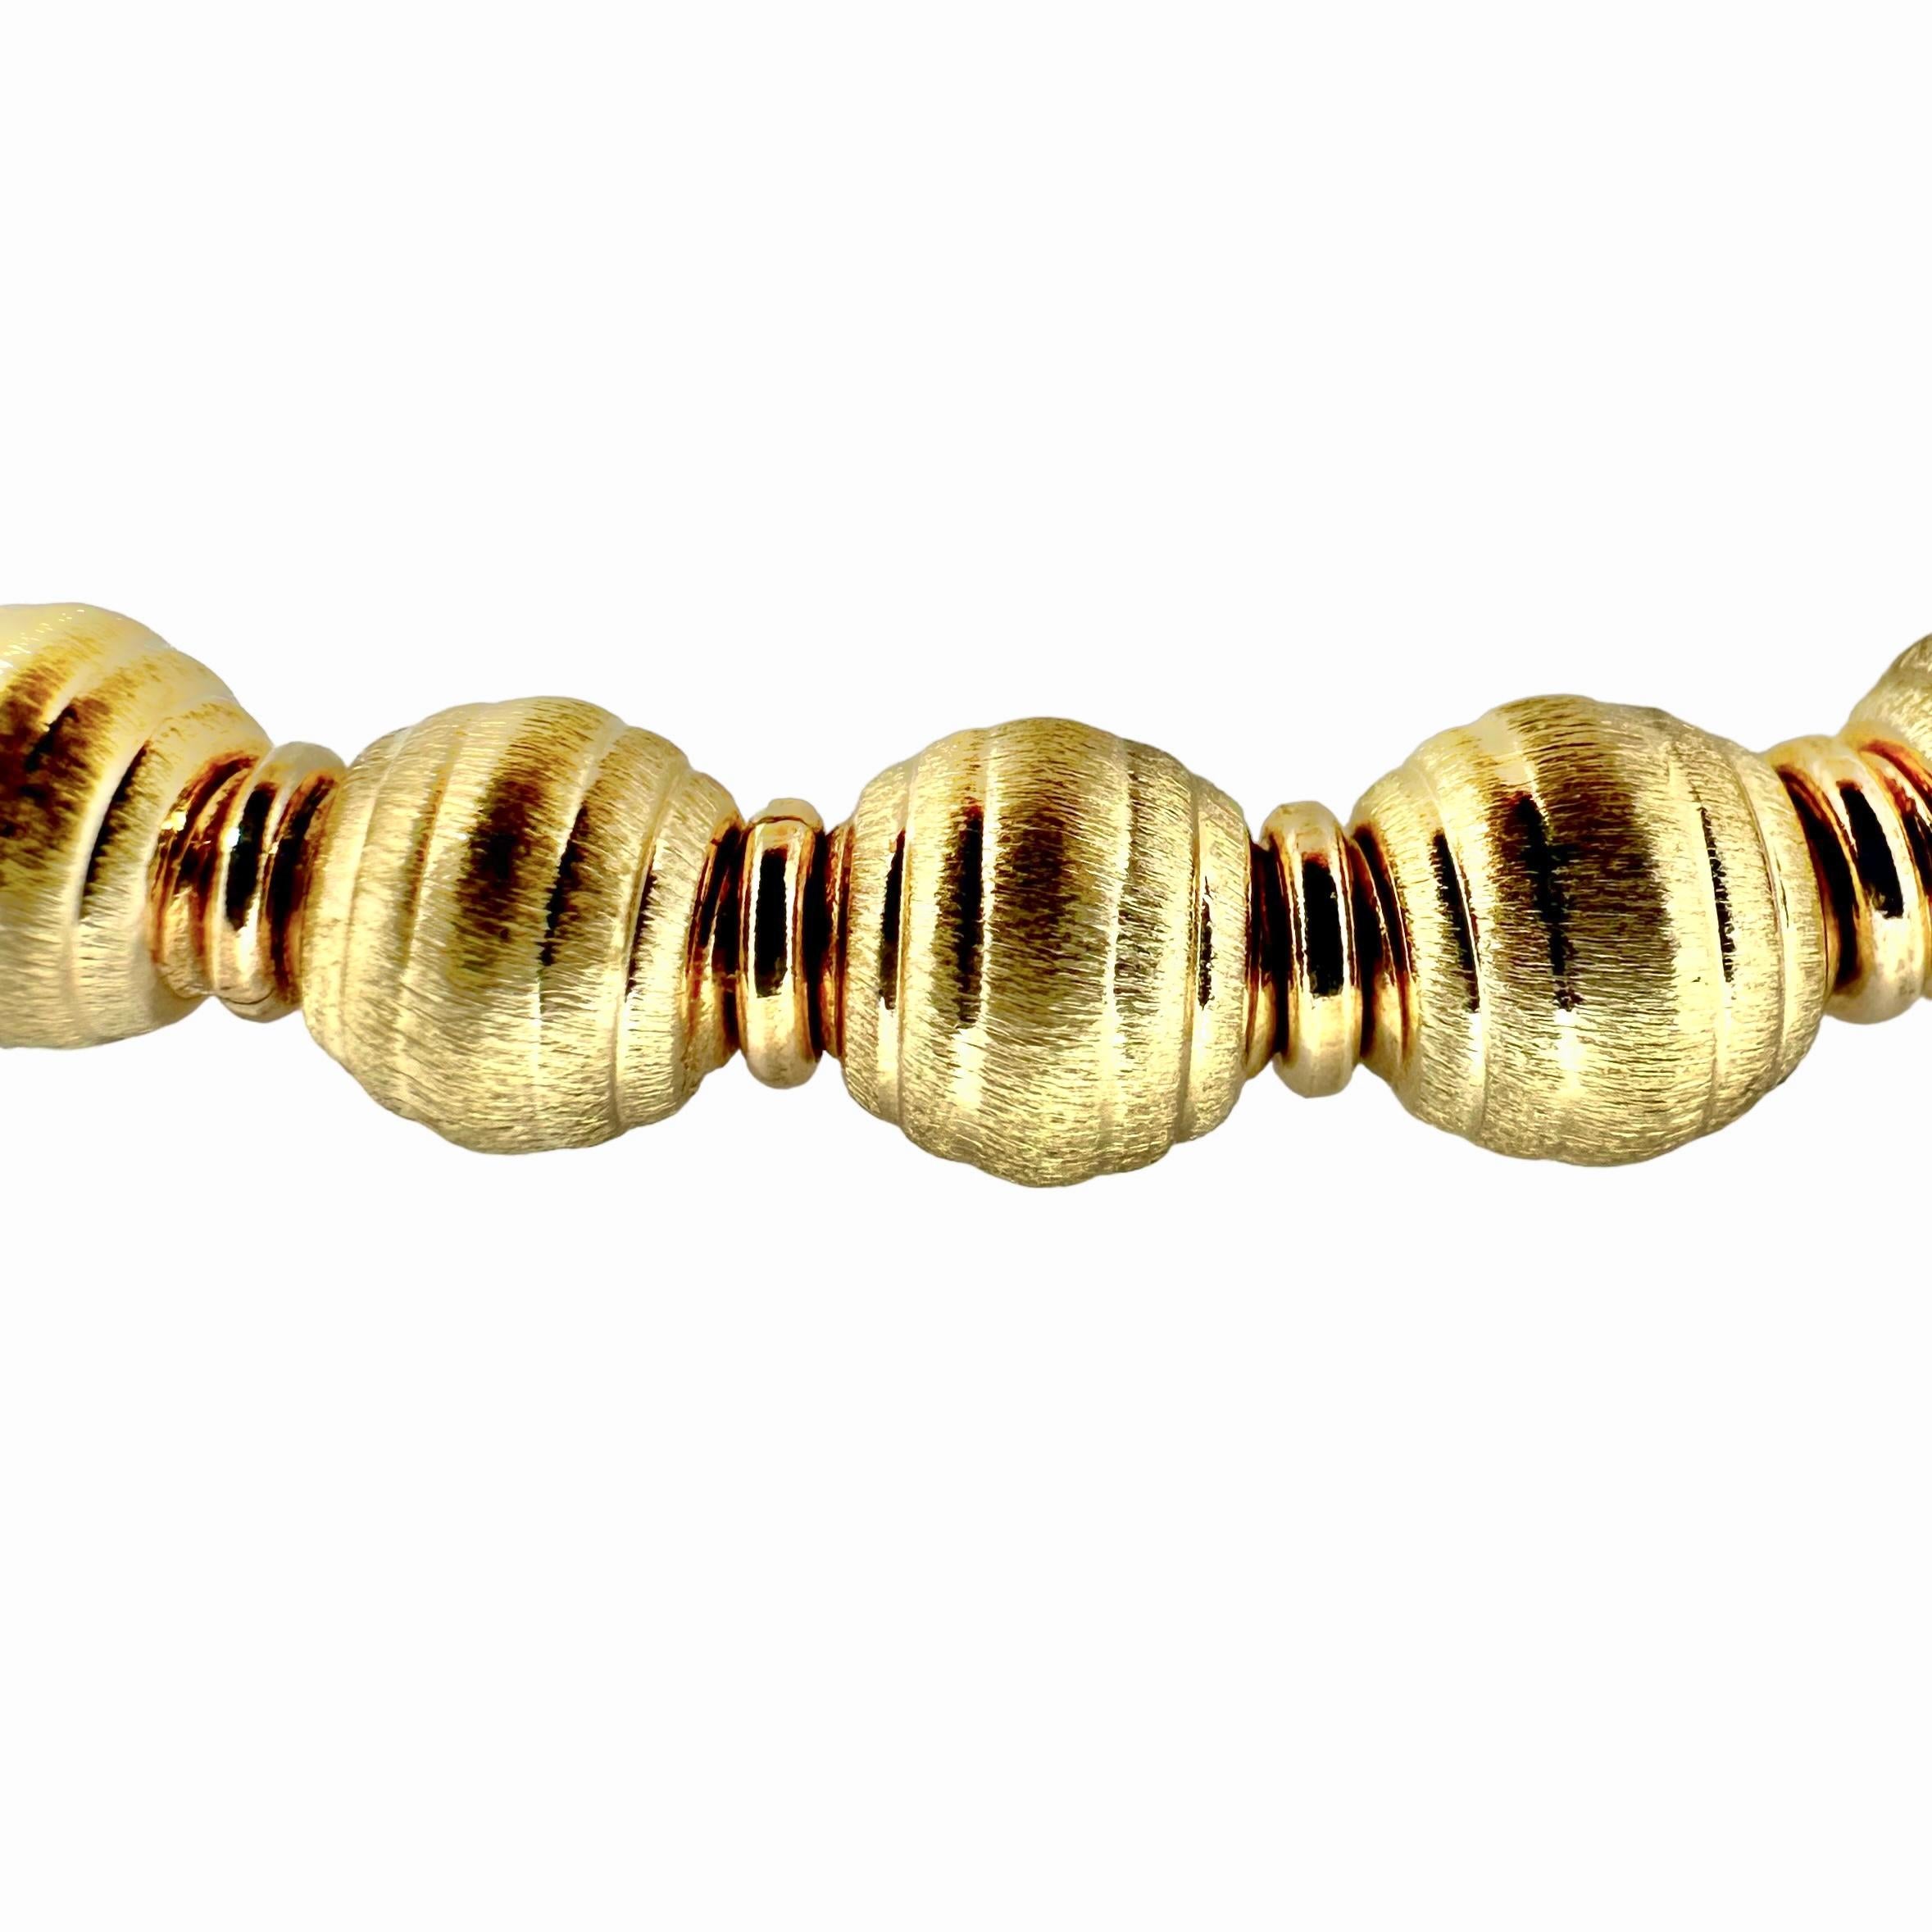 This Italian 14k yellow gold bead necklace is precision crafted with an extreme amount of detail lavished on each bead. A smart, tailored look that is ideal for casual wear or for office wear. Every 6mm bead is brush finish on the body and high